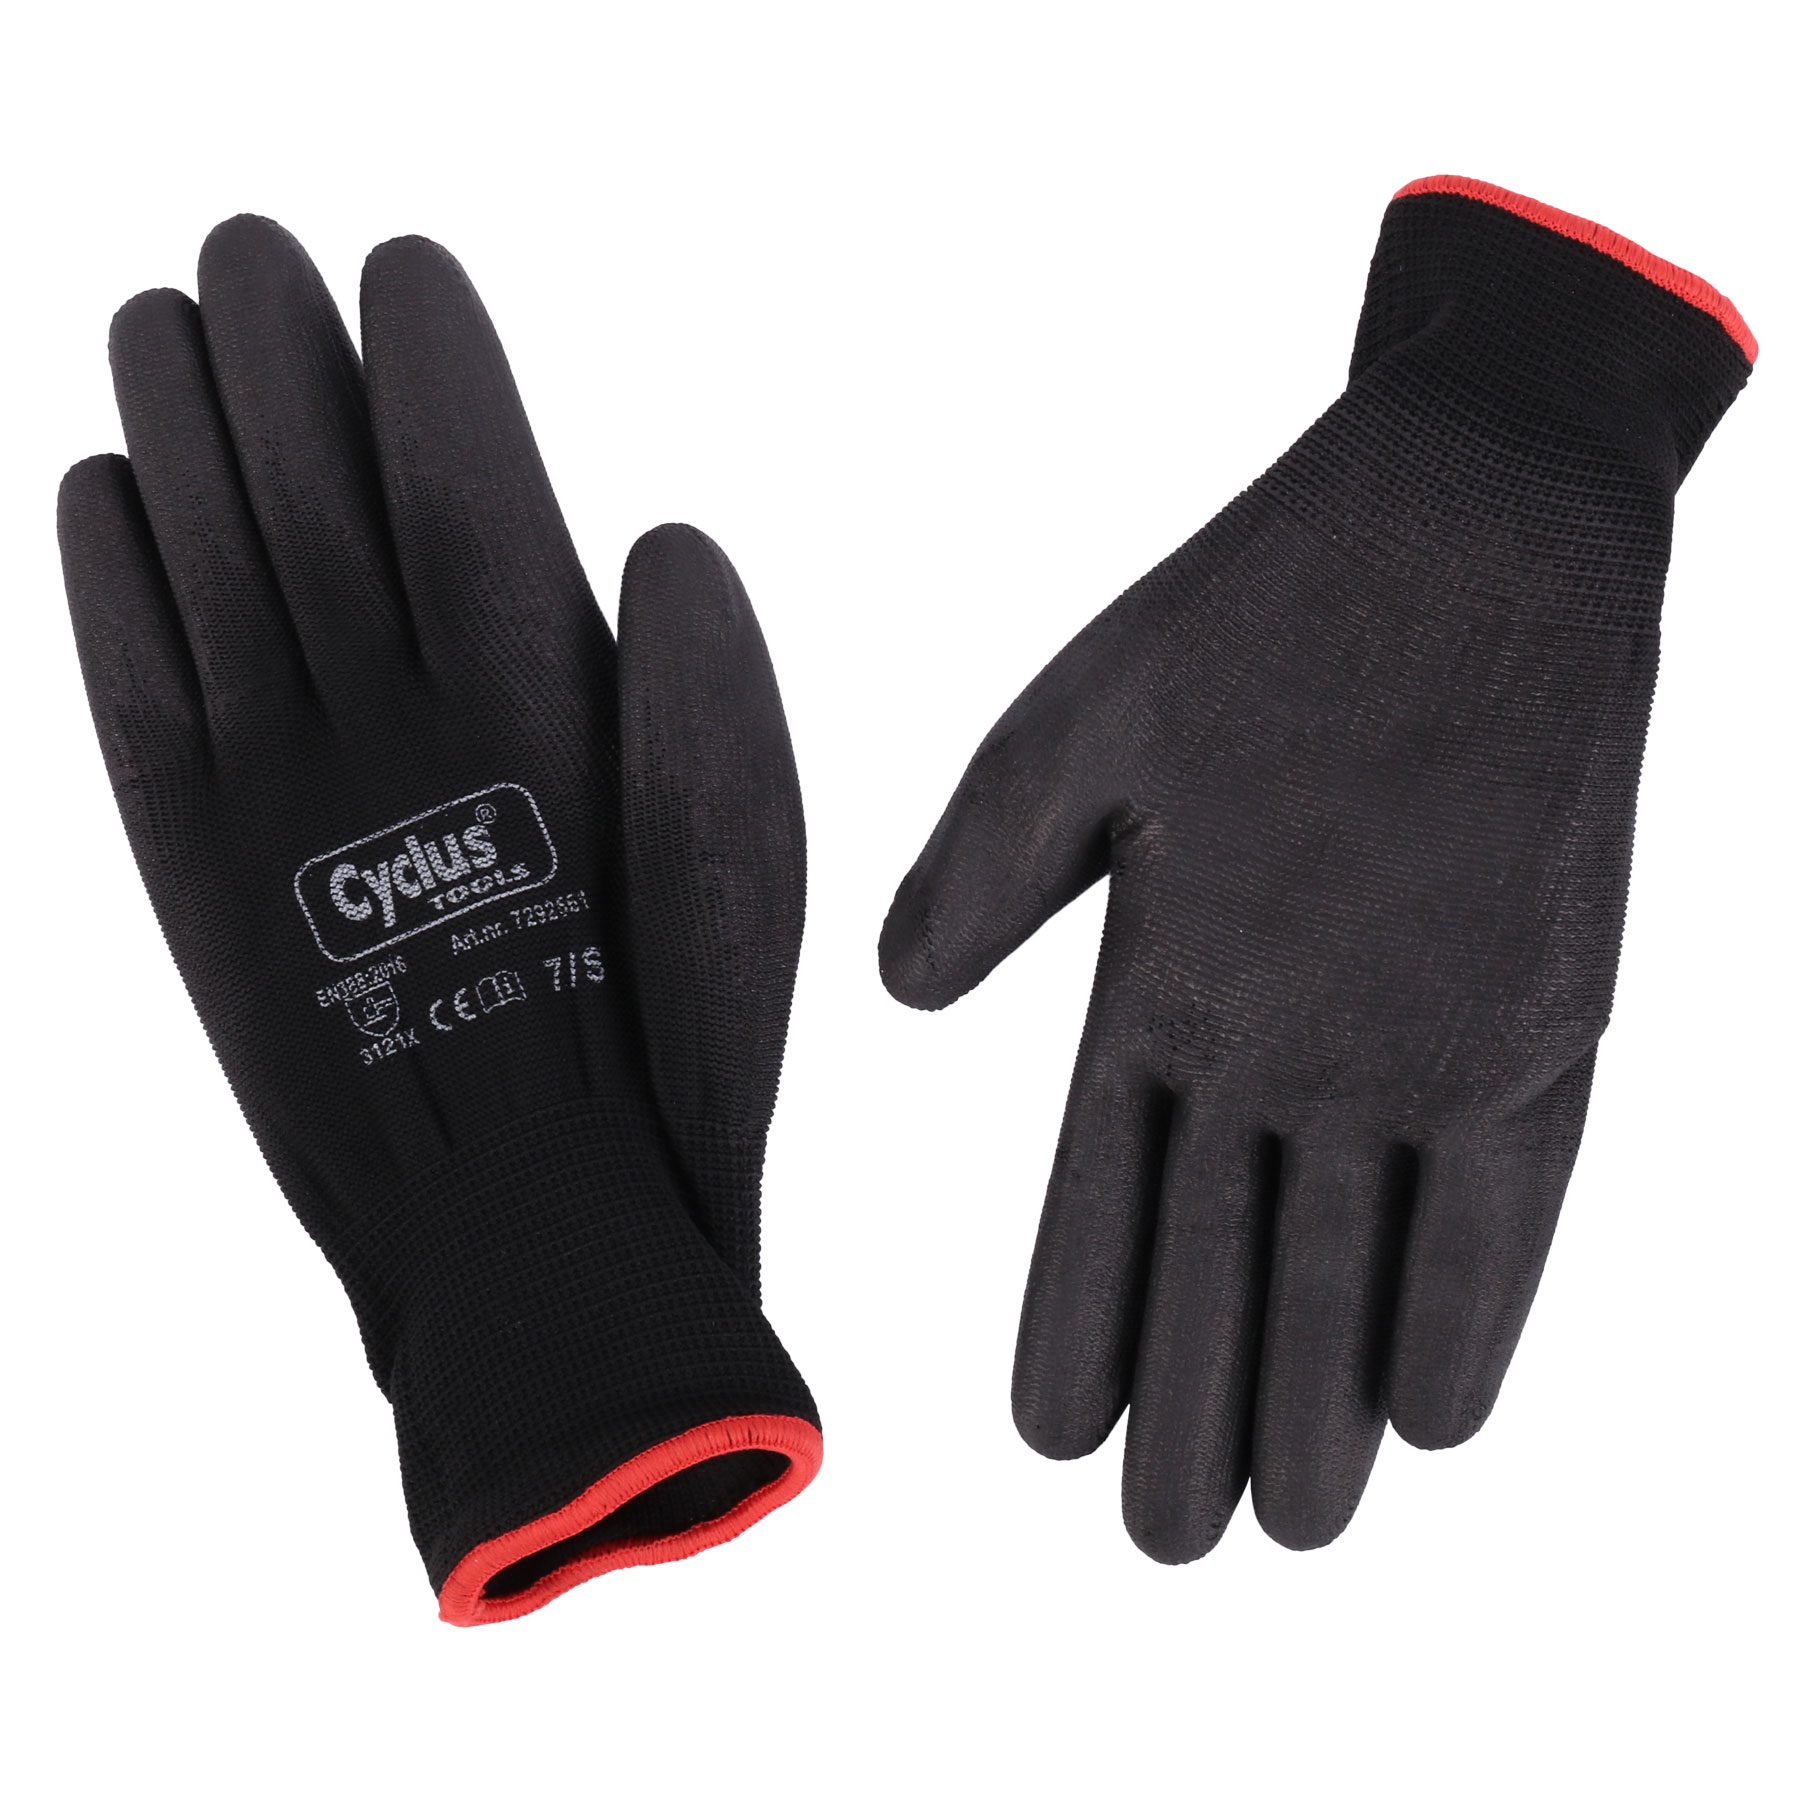 Picture of Cyclus Tools Assembly Gloves - 1 pair